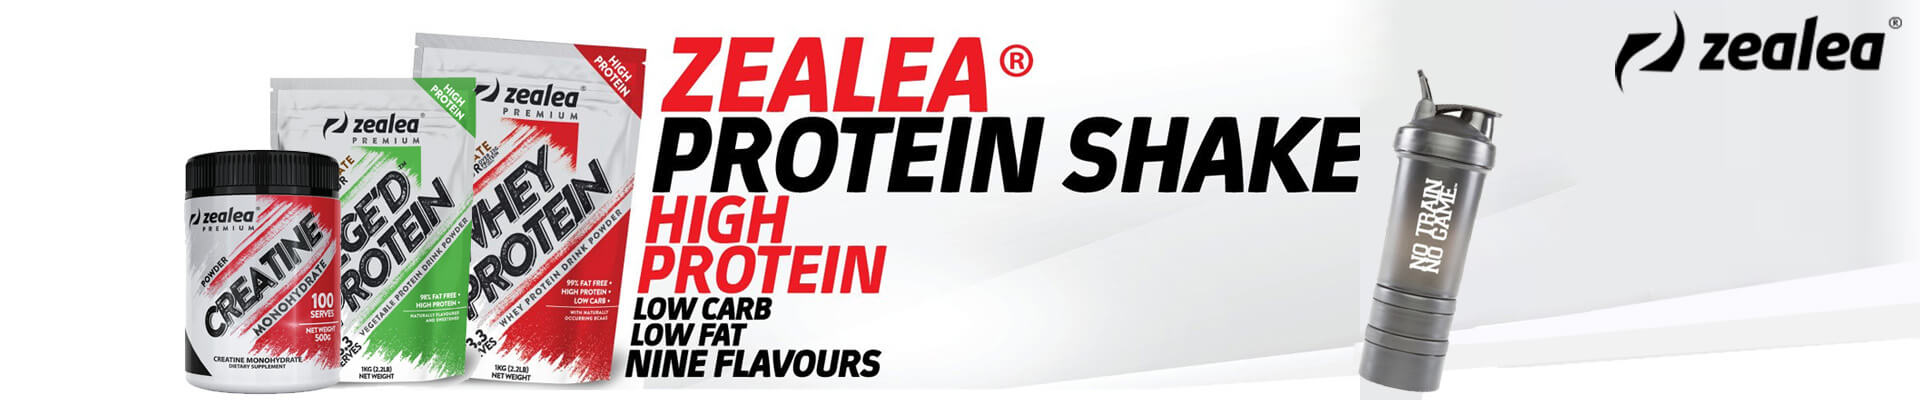 Zealea Whey & Natural Proteins & Supplements